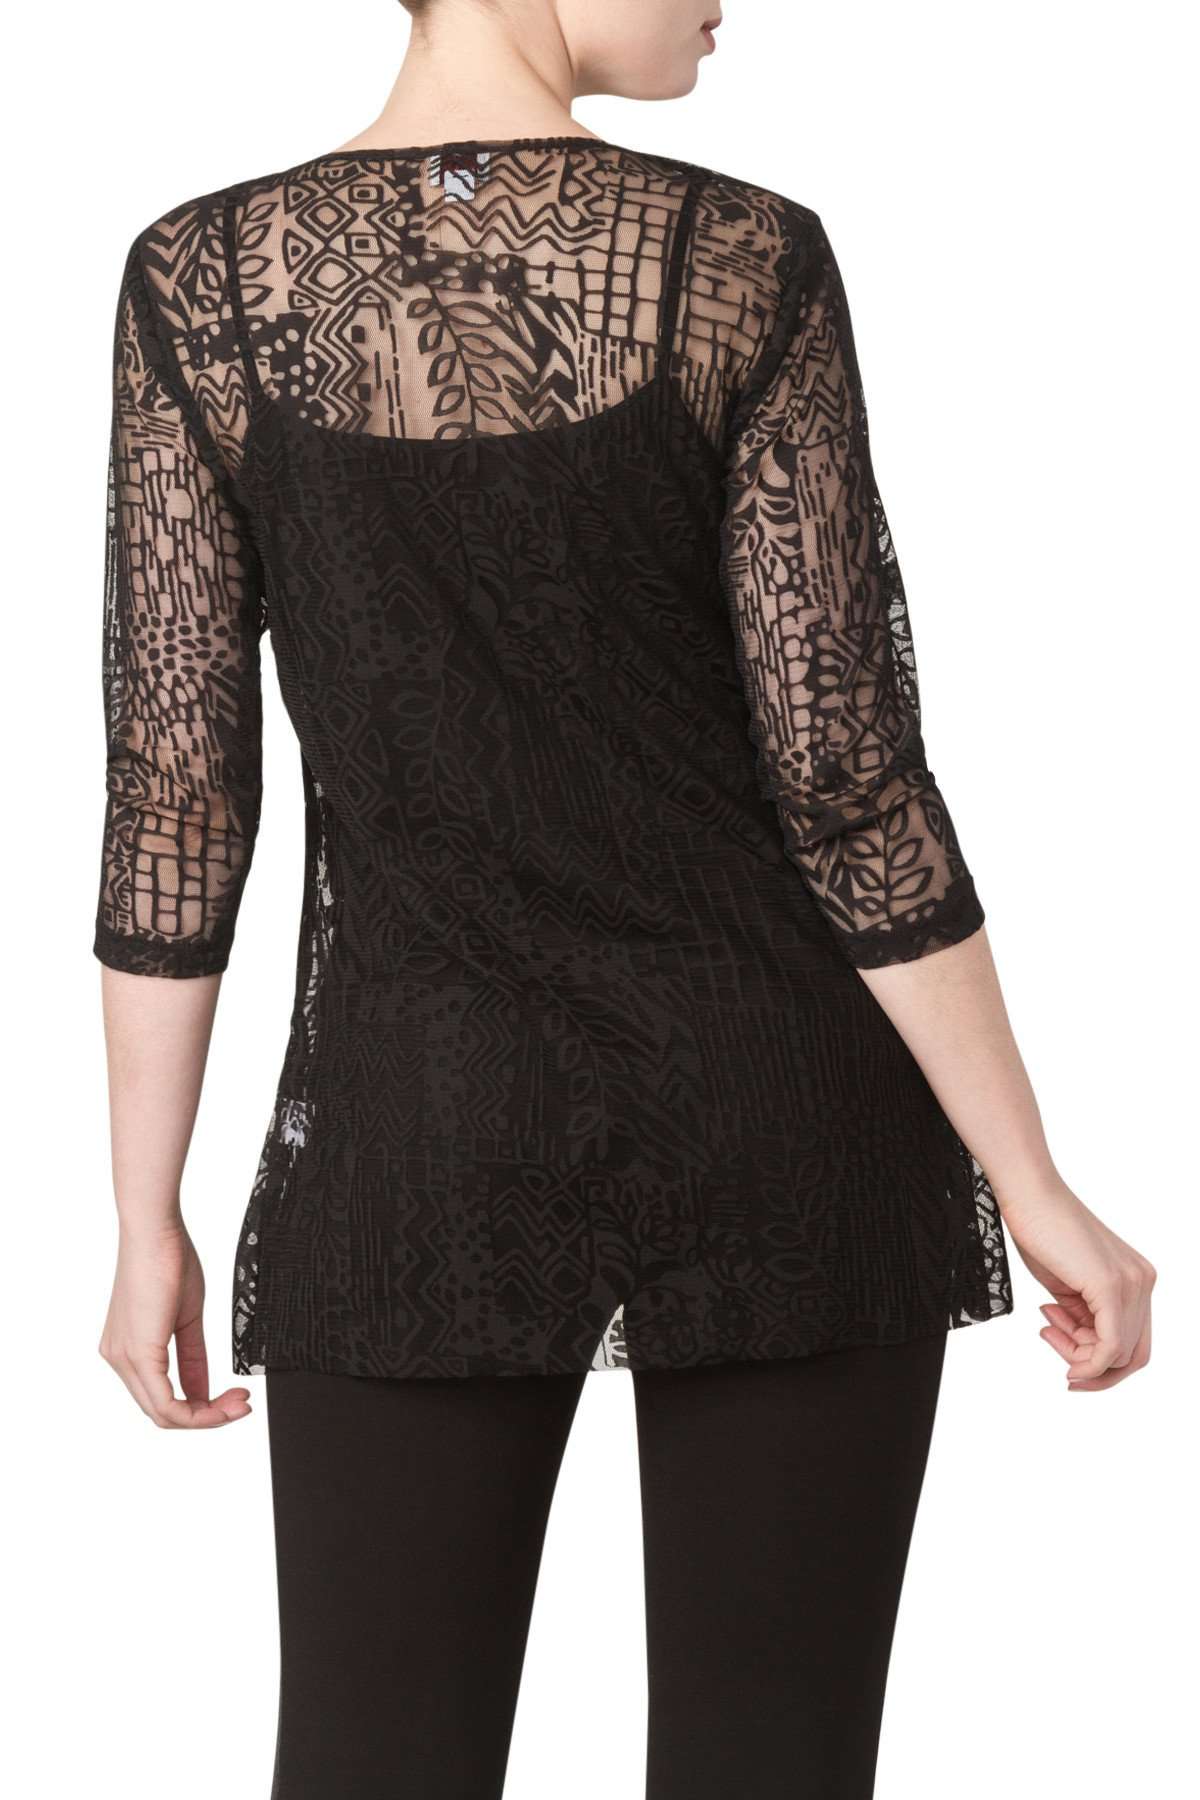 Women's Tops on Sale Black Lace Flattering Fit Quality Stretch Fabric Made in Canada Yvonne Marie Boutiques - Yvonne Marie - Yvonne Marie